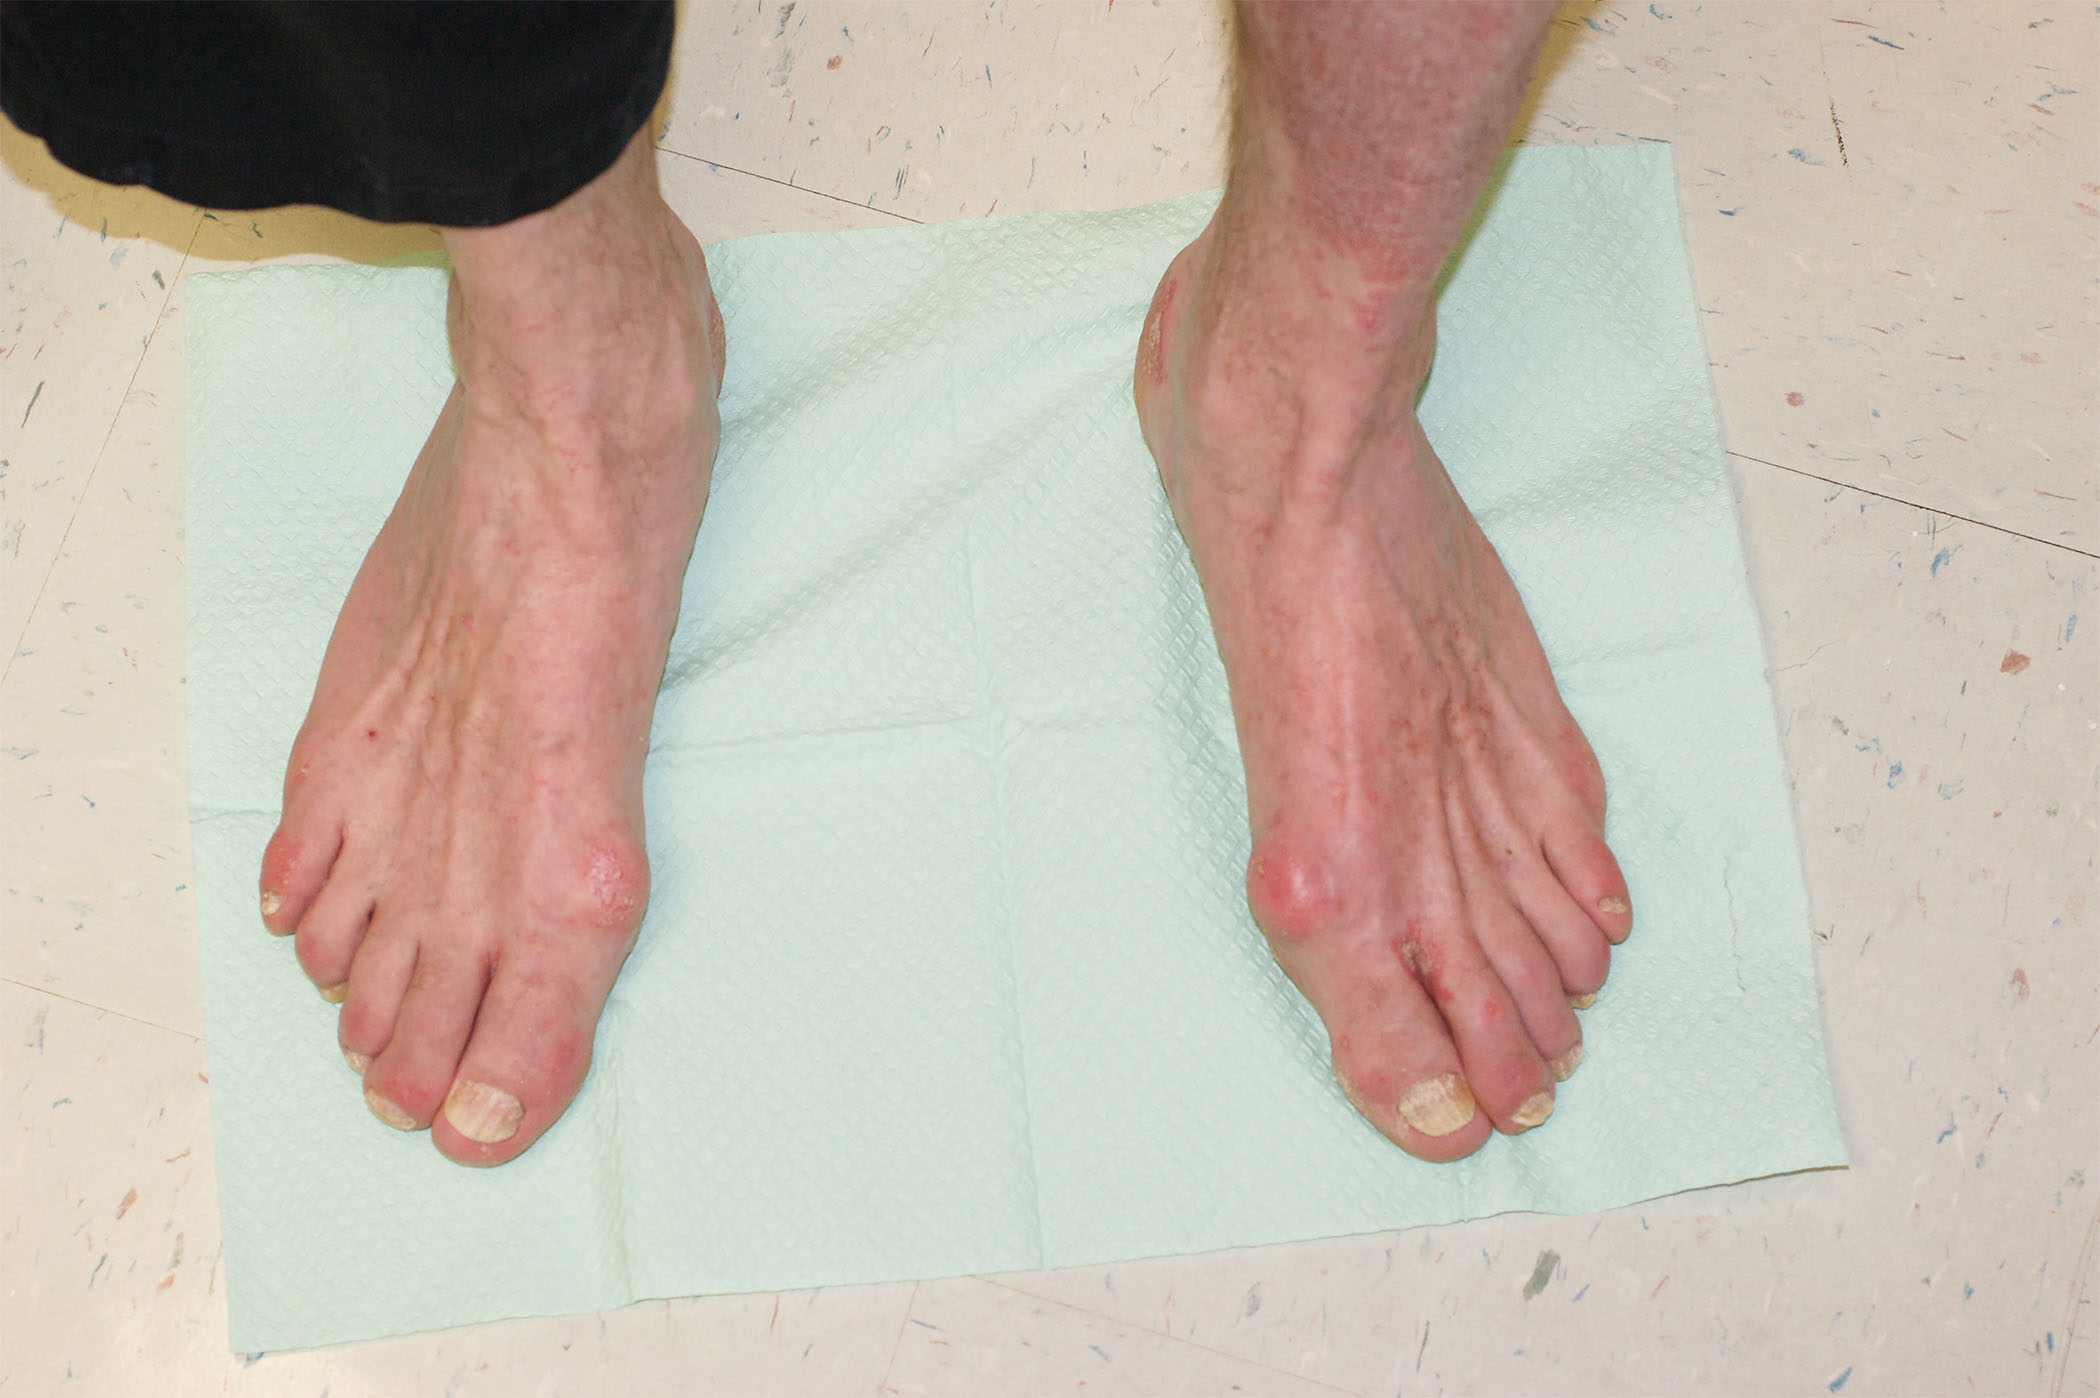 Diabetic Peripheral Neuropathy - Highlands Foot and Ankle